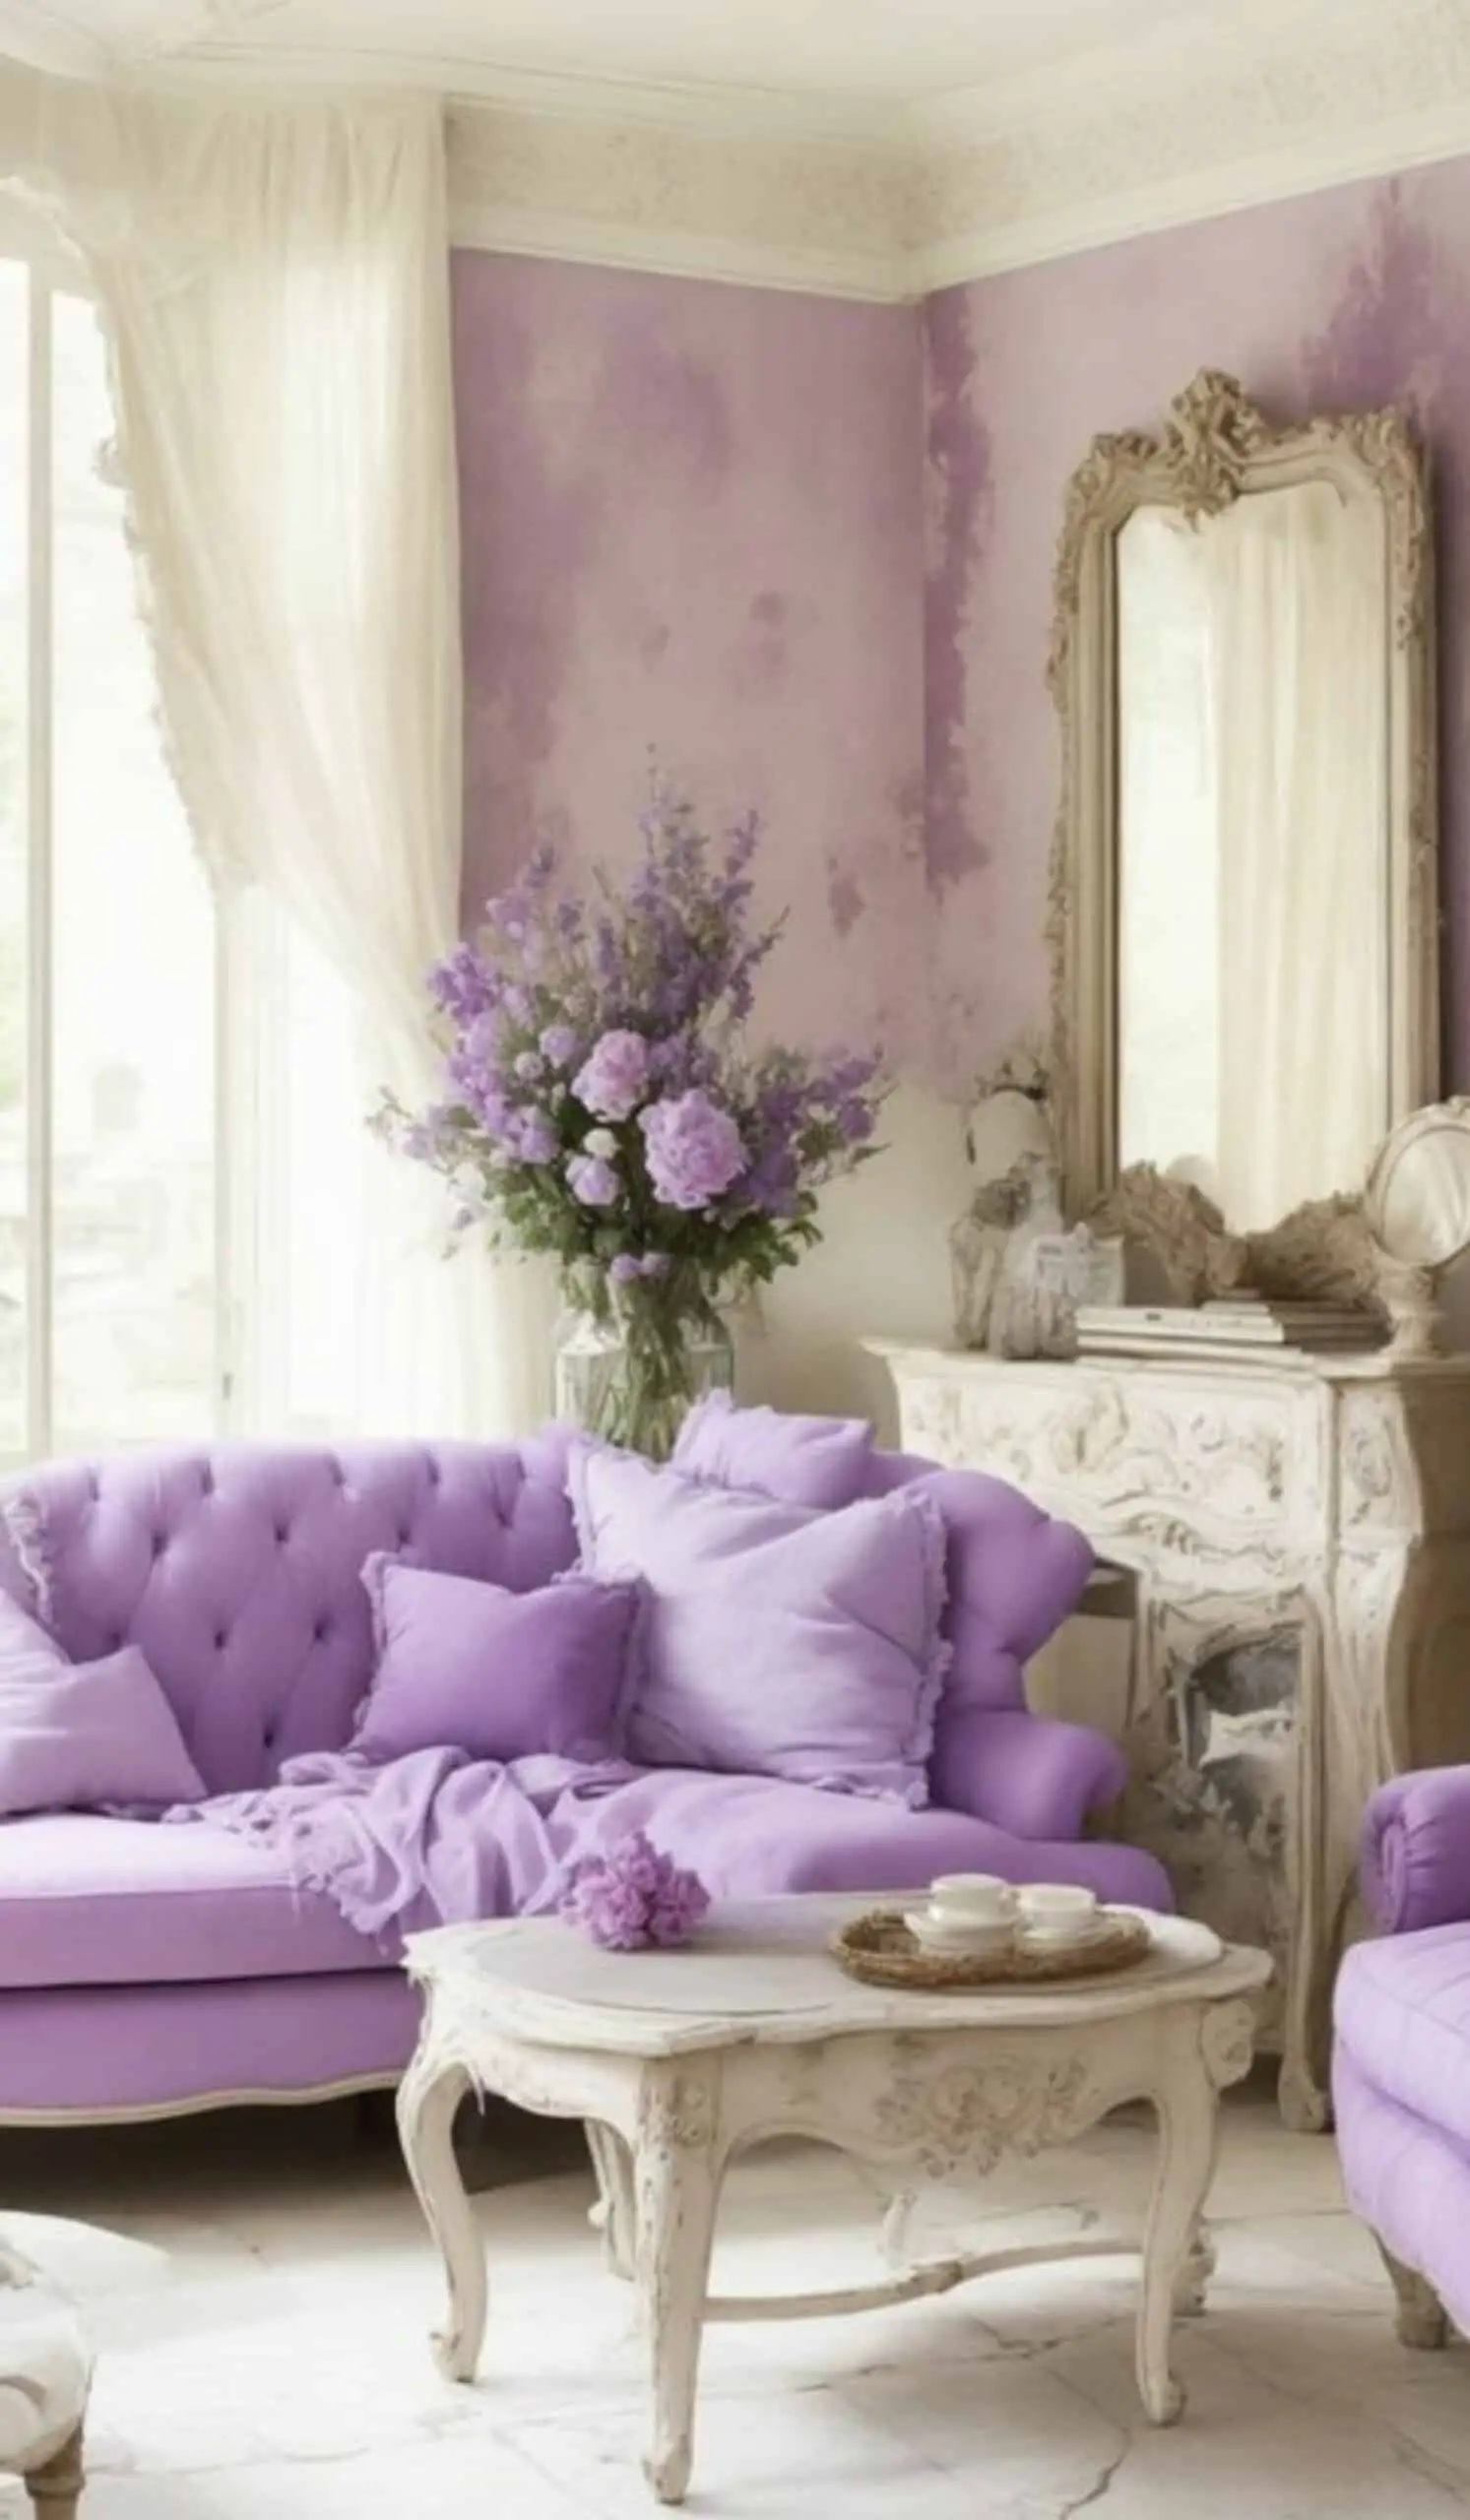 Vintage elements and lilac are a match made in Heaven